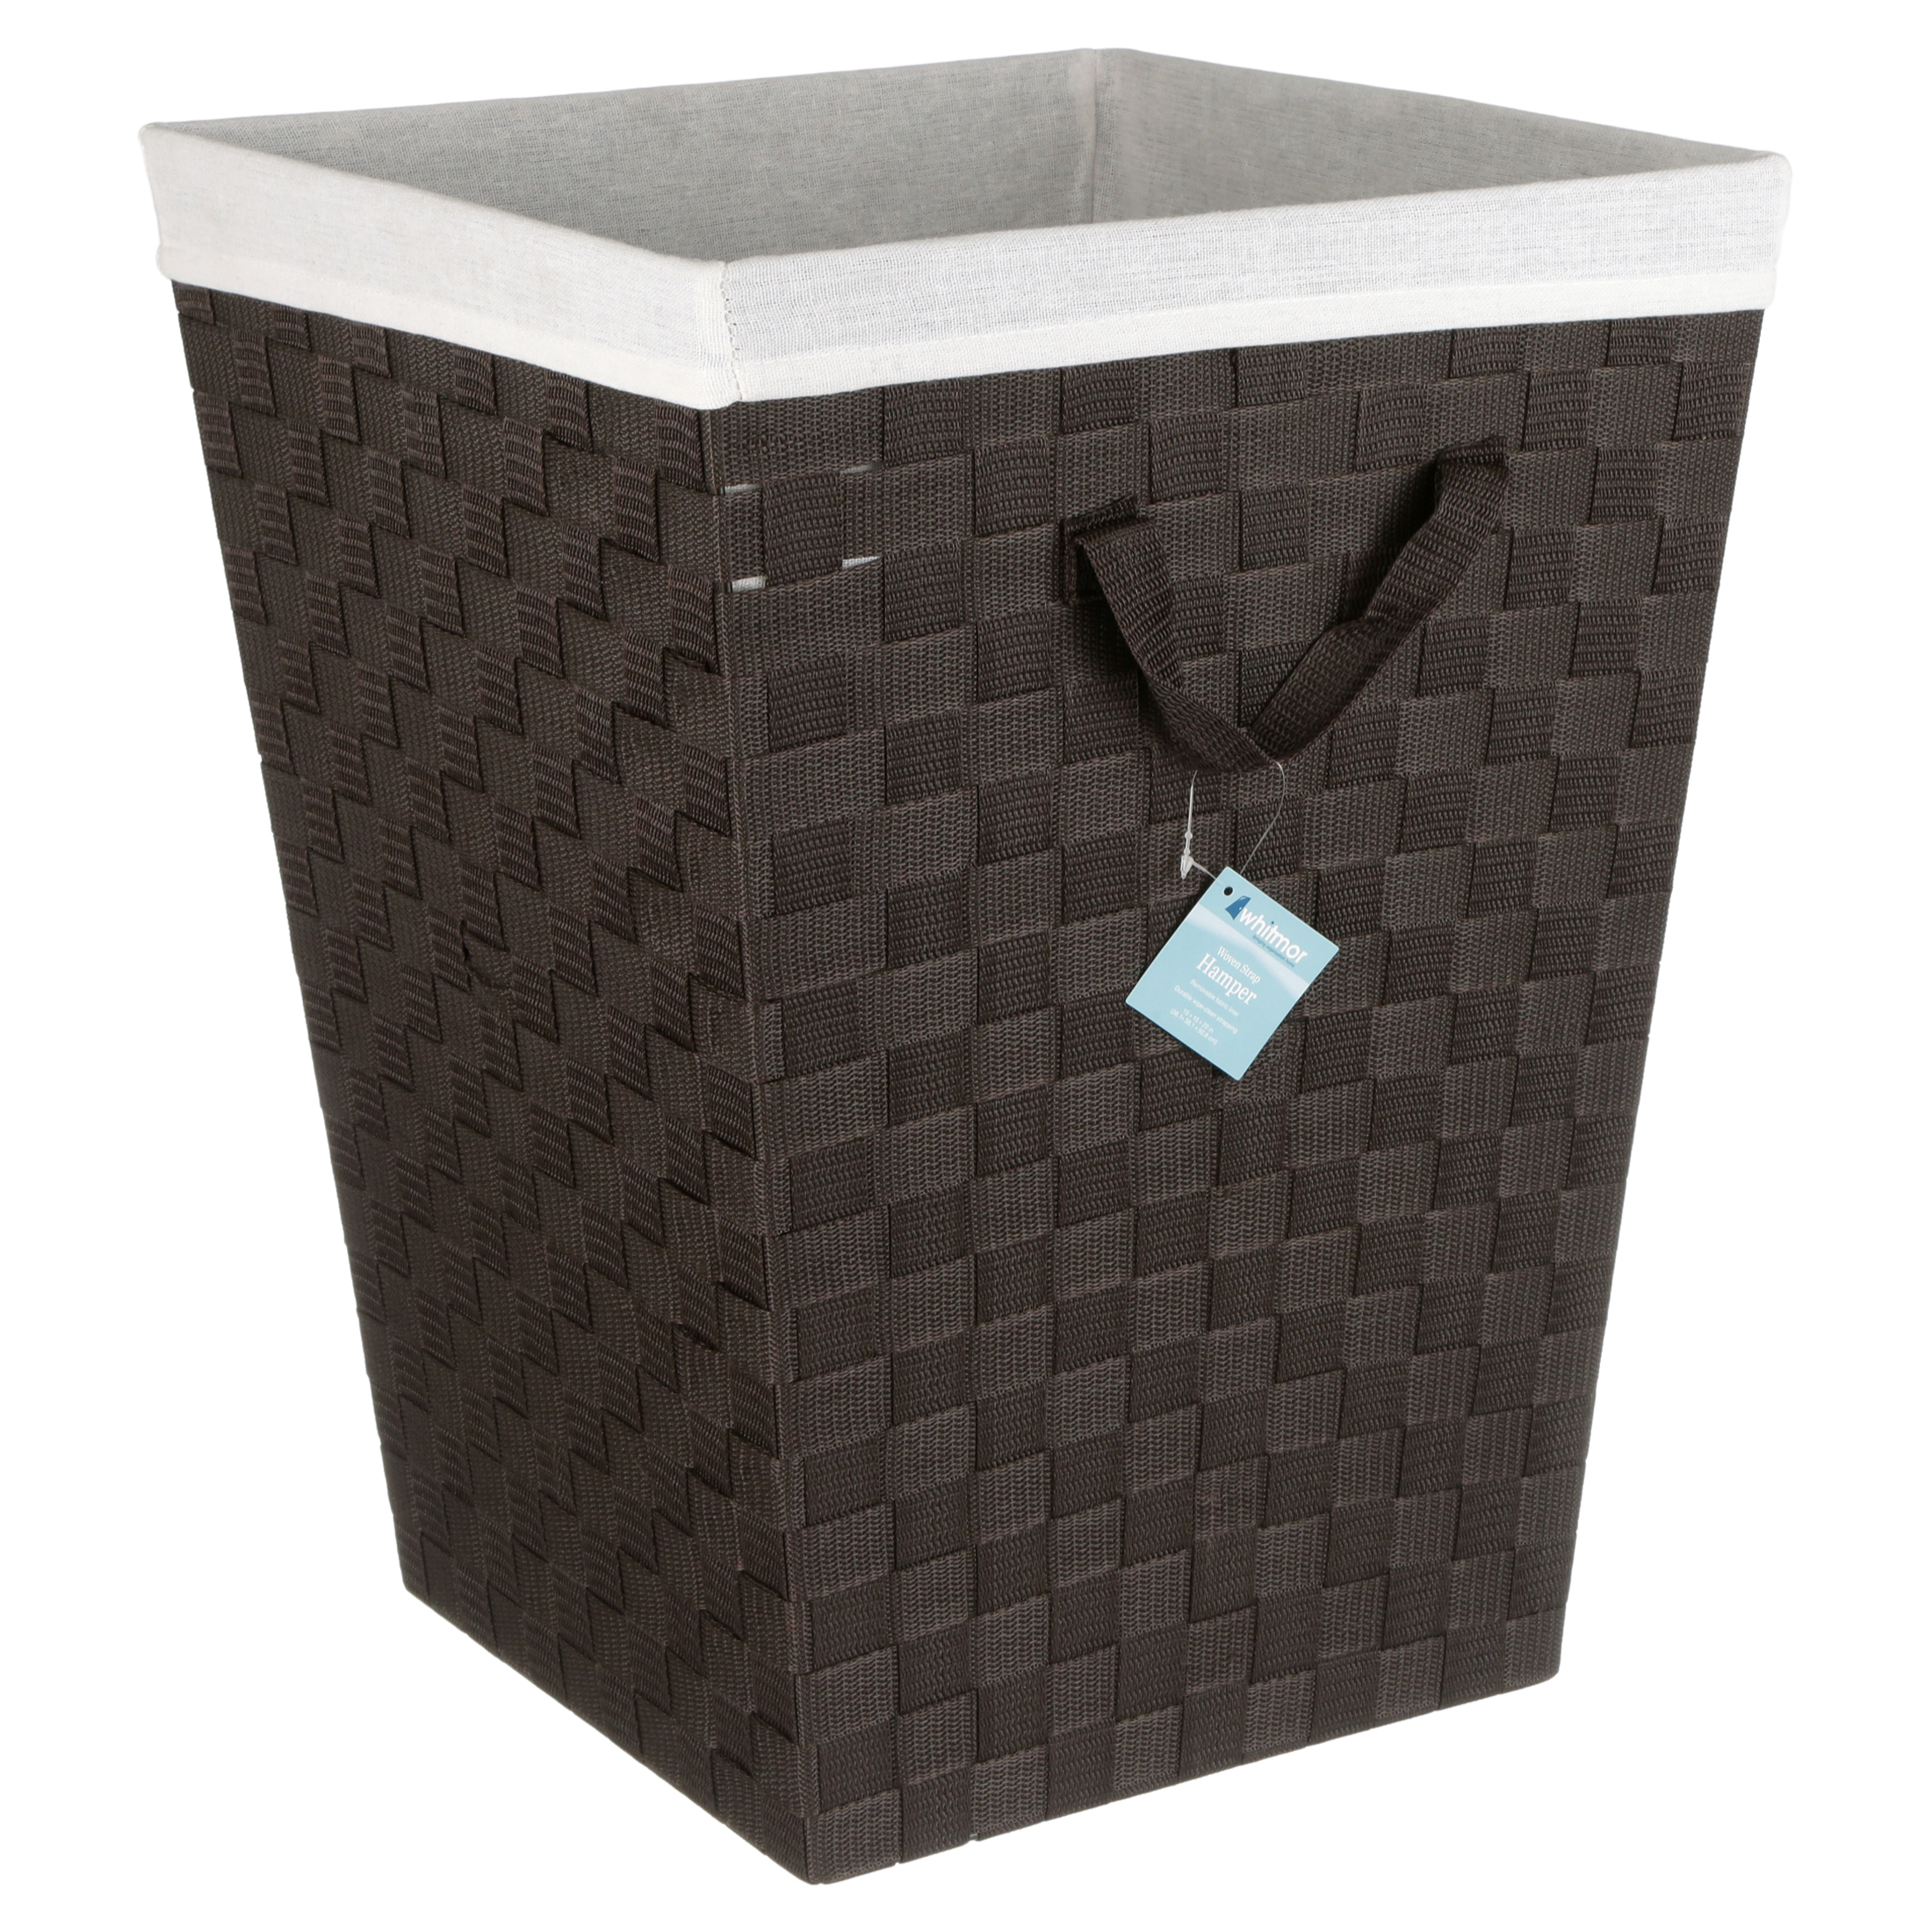 Whitmor Woven Strap Laundry Hamper with Fabric Liner, Espresso - image 5 of 8